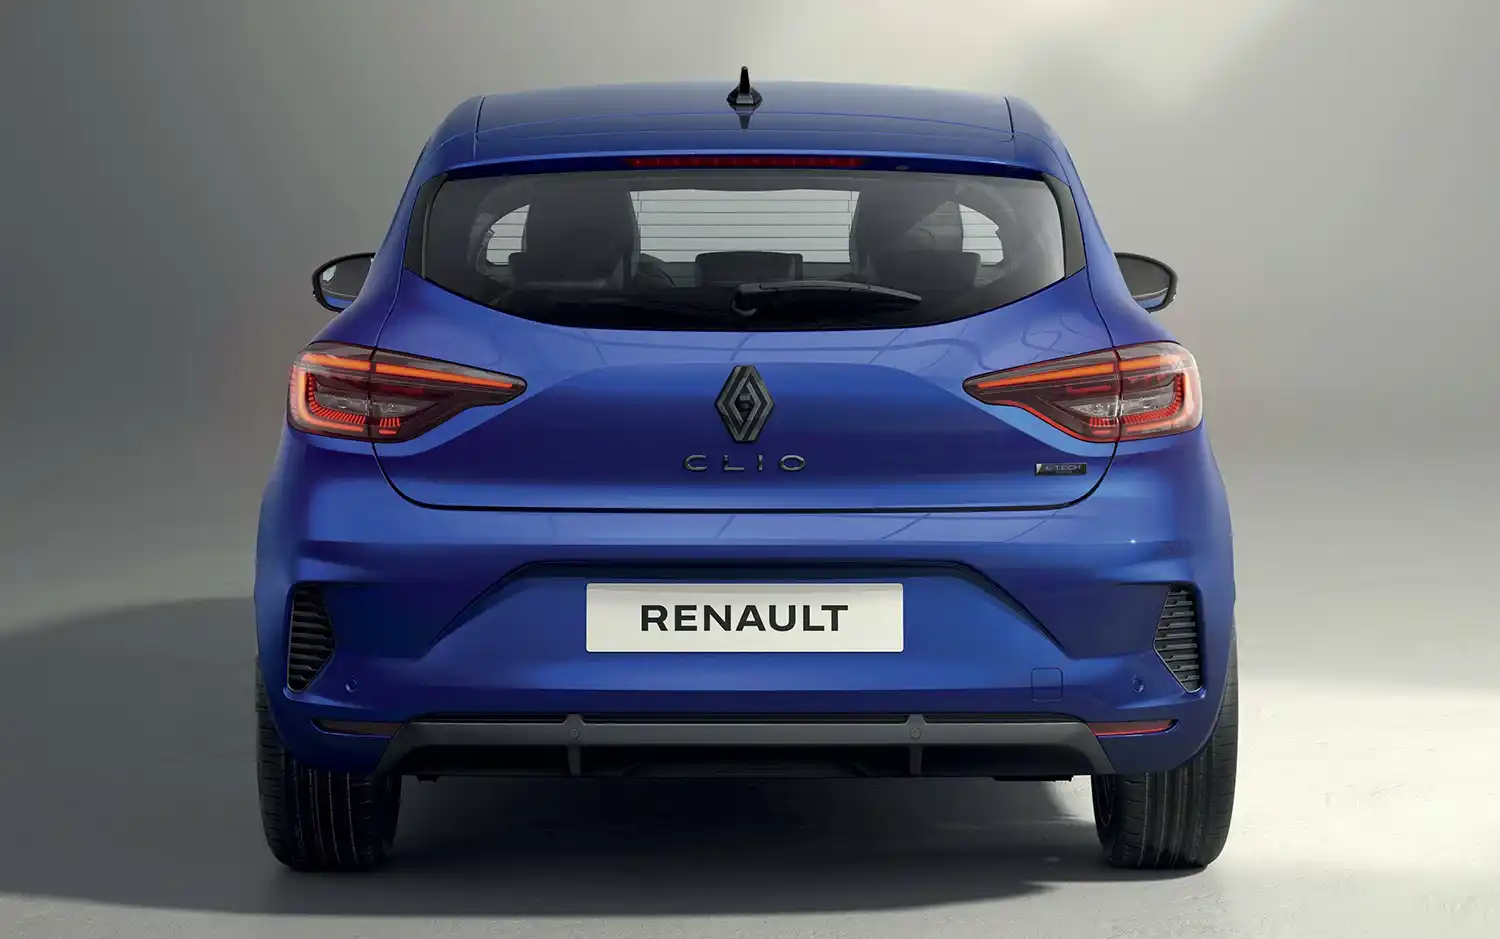 Renault Clio dimensions, boot space and electrification